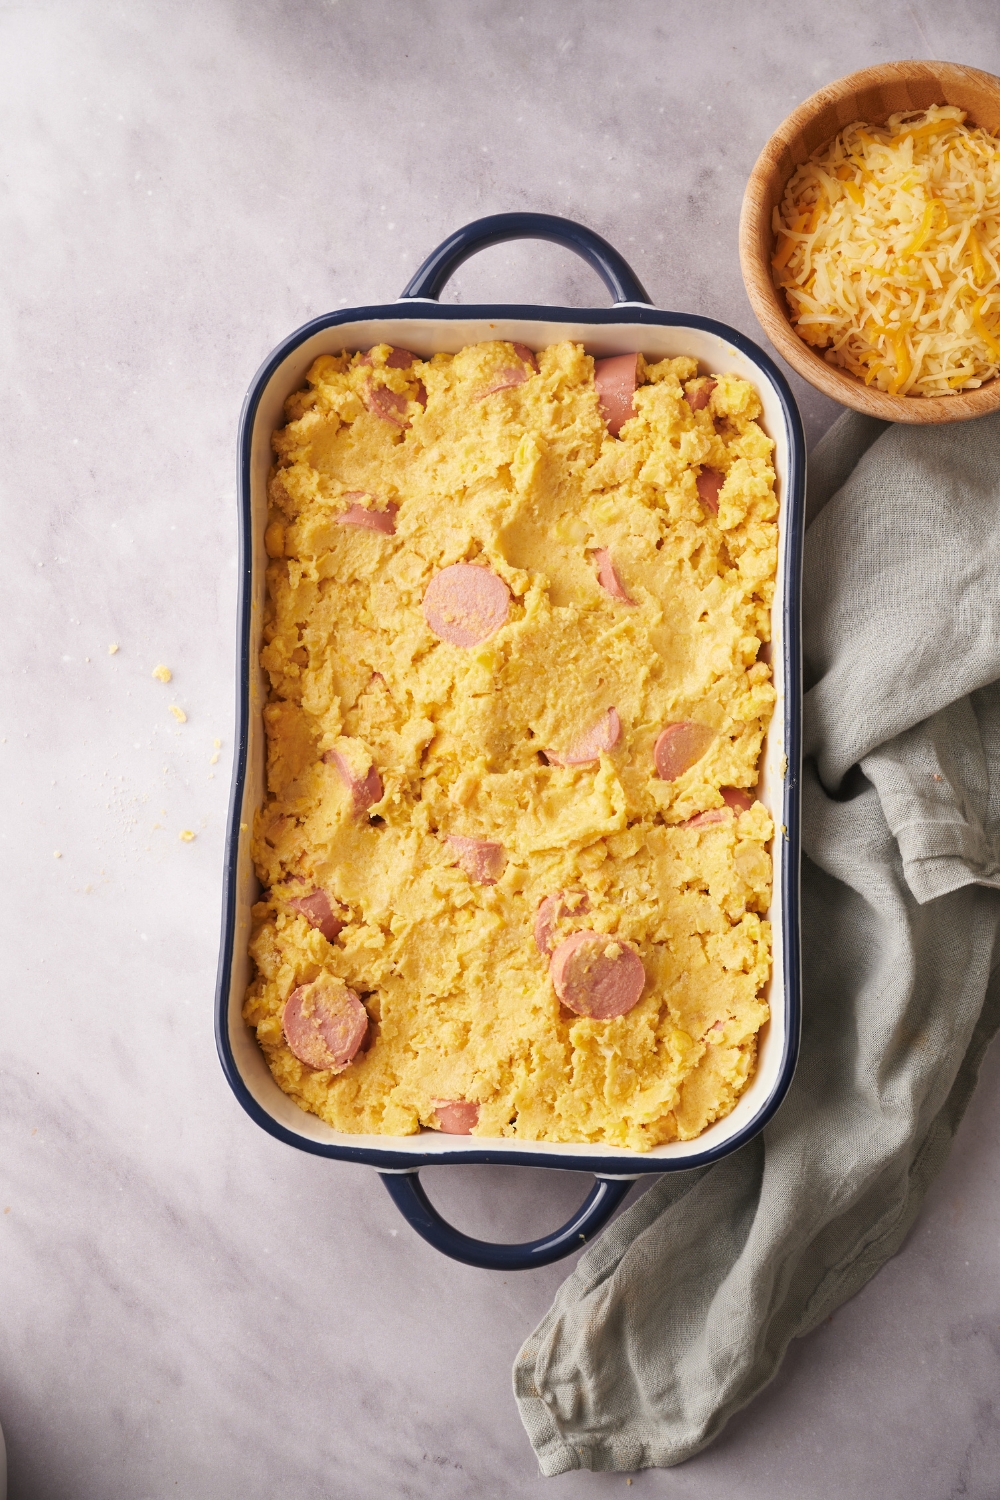 A baking dish filled with cornbread batter and hot dog slices.